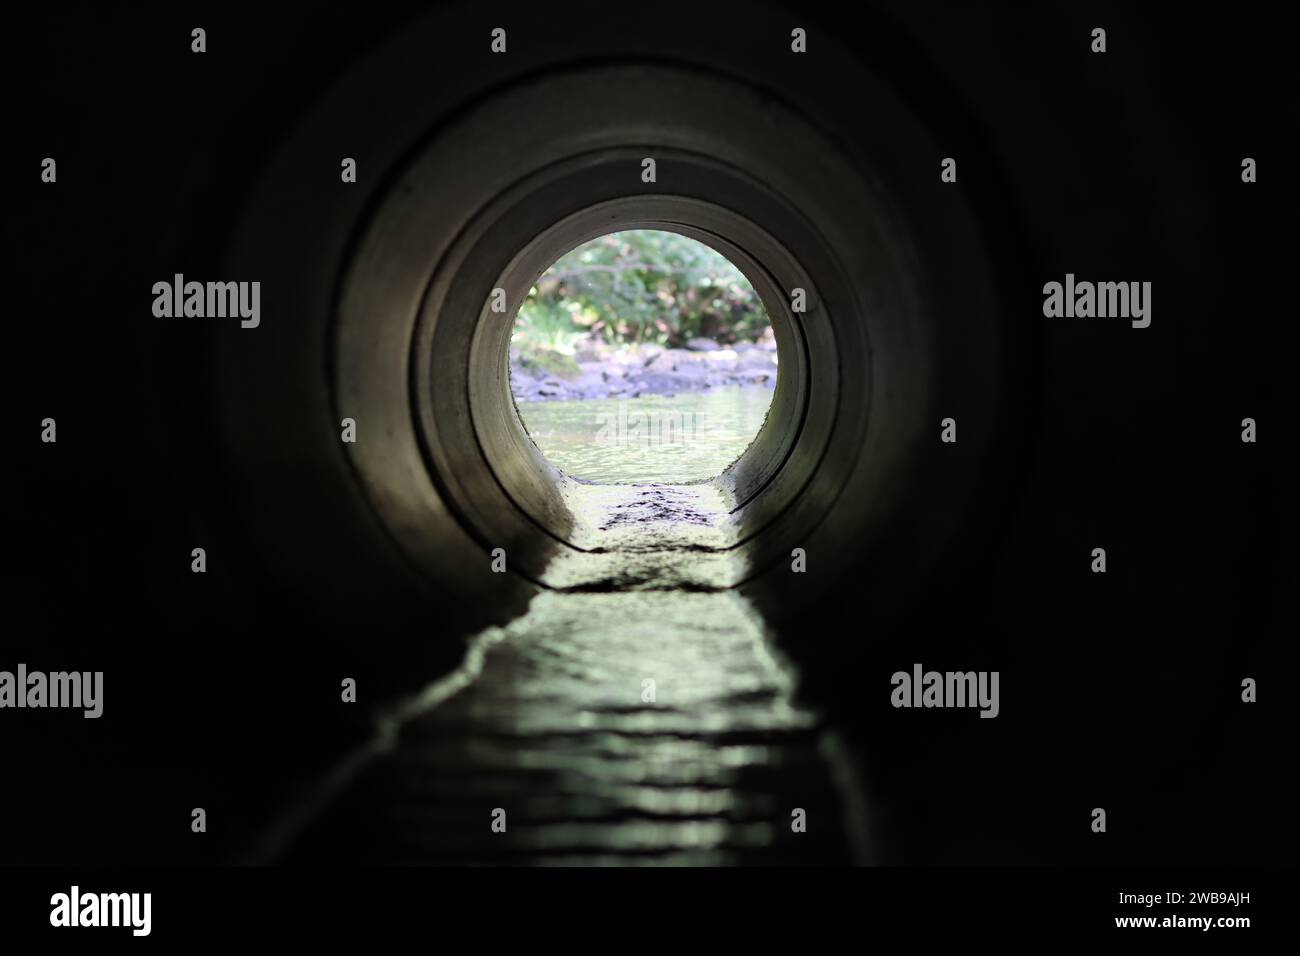 View through a round concrete tunnel carrying a stream beneath a road Stock Photo